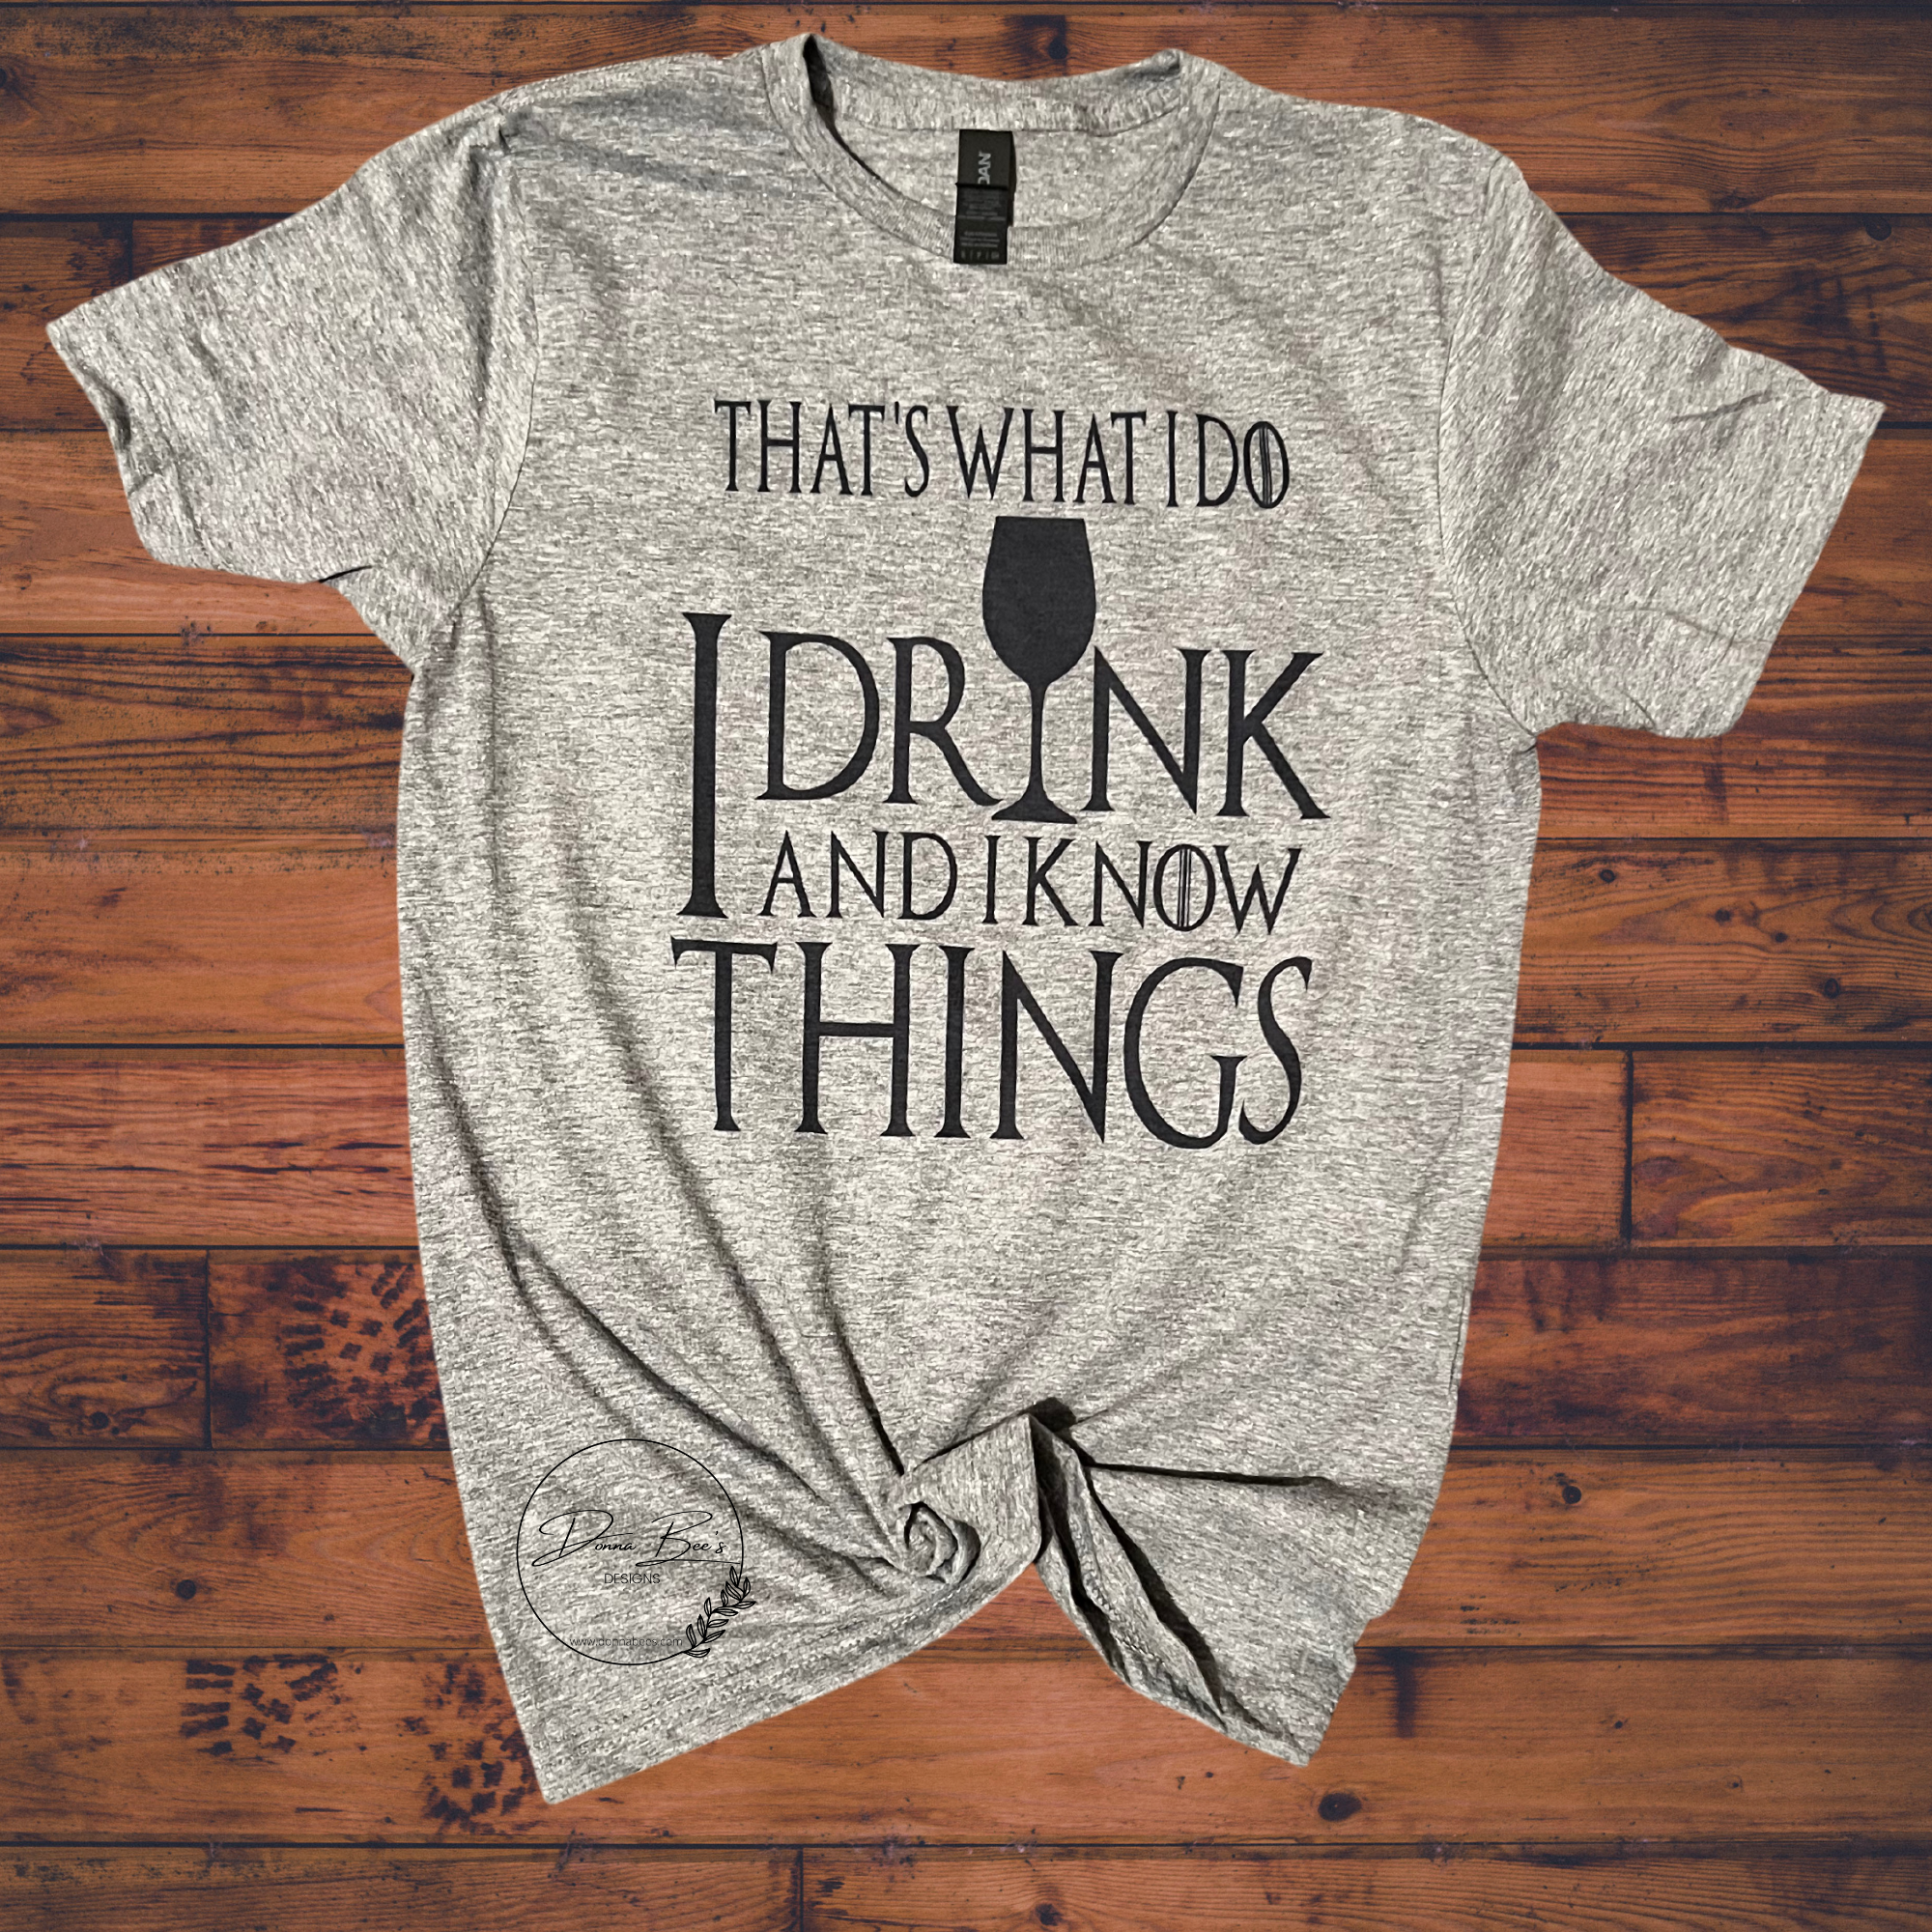 I Drink and I know things tee